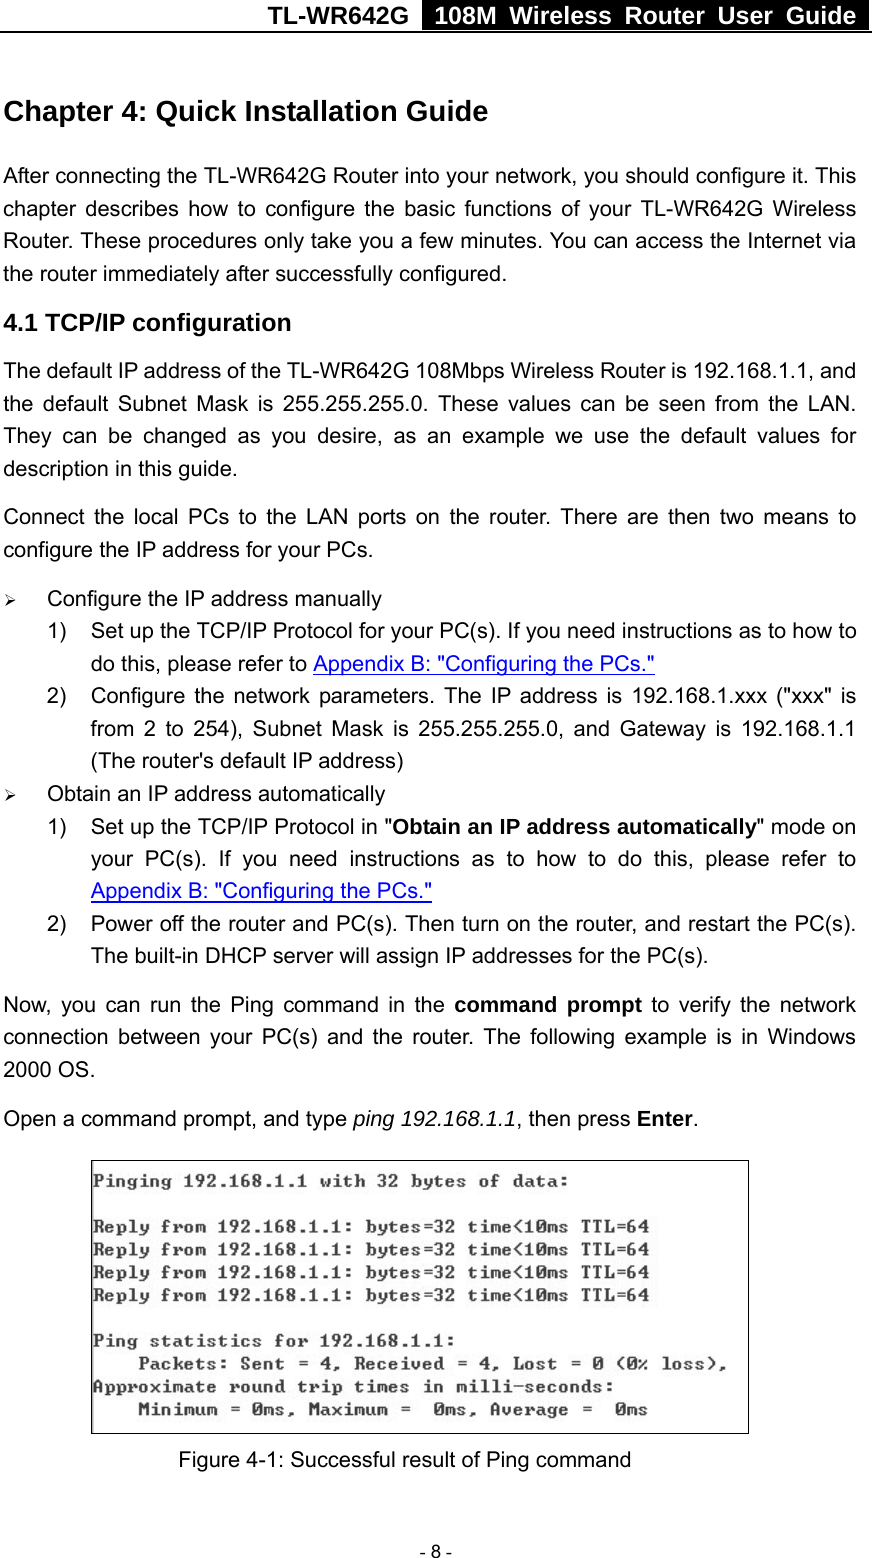 TL-WR642G   108M Wireless Router User Guide   - 8 - Chapter 4: Quick Installation Guide After connecting the TL-WR642G Router into your network, you should configure it. This chapter describes how to configure the basic functions of your TL-WR642G Wireless Router. These procedures only take you a few minutes. You can access the Internet via the router immediately after successfully configured. 4.1 TCP/IP configuration The default IP address of the TL-WR642G 108Mbps Wireless Router is 192.168.1.1, and the default Subnet Mask is 255.255.255.0. These values can be seen from the LAN. They can be changed as you desire, as an example we use the default values for description in this guide. Connect the local PCs to the LAN ports on the router. There are then two means to configure the IP address for your PCs. ¾ Configure the IP address manually 1)  Set up the TCP/IP Protocol for your PC(s). If you need instructions as to how to do this, please refer to Appendix B: &quot;Configuring the PCs.&quot; 2)  Configure the network parameters. The IP address is 192.168.1.xxx (&quot;xxx&quot; is from 2 to 254), Subnet Mask is 255.255.255.0, and Gateway is 192.168.1.1 (The router&apos;s default IP address) ¾ Obtain an IP address automatically 1)  Set up the TCP/IP Protocol in &quot;Obtain an IP address automatically&quot; mode on your PC(s). If you need instructions as to how to do this, please refer to Appendix B: &quot;Configuring the PCs.&quot; 2)  Power off the router and PC(s). Then turn on the router, and restart the PC(s). The built-in DHCP server will assign IP addresses for the PC(s). Now, you can run the Ping command in the command prompt to verify the network connection between your PC(s) and the router. The following example is in Windows 2000 OS. Open a command prompt, and type ping 192.168.1.1, then press Enter.                Figure 4-1: Successful result of Ping command 